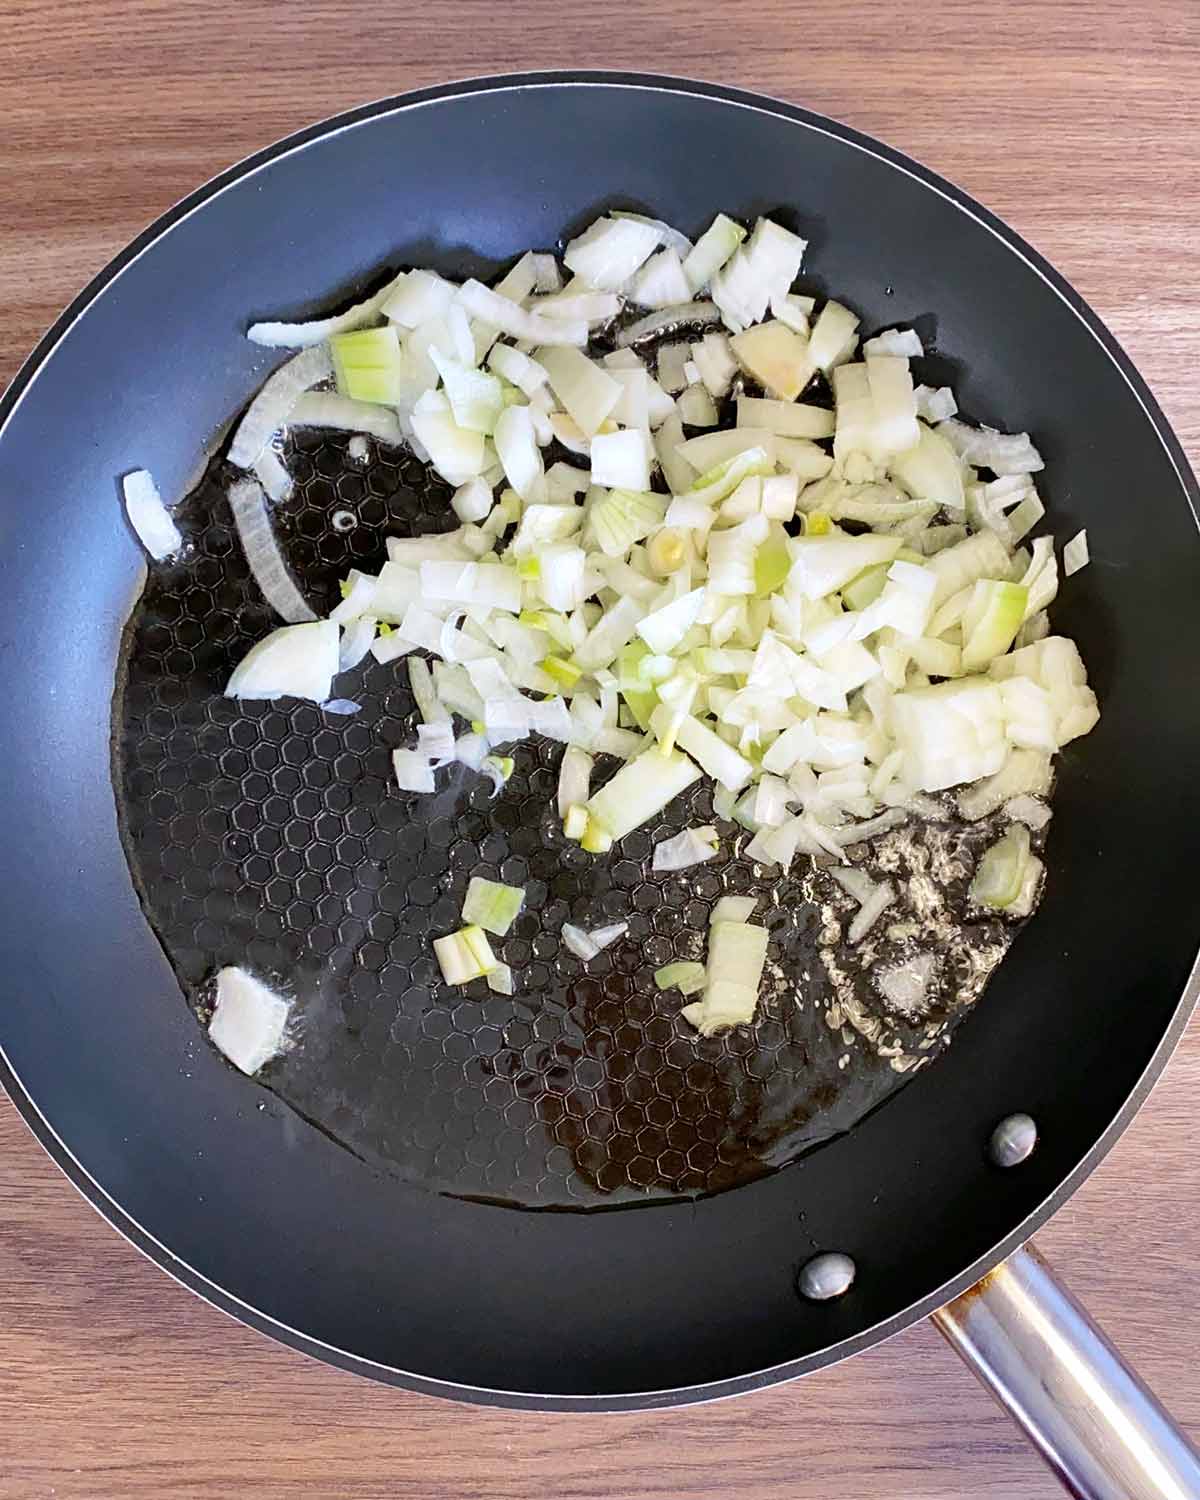 A frying pan with chopped onions sauteing in it.